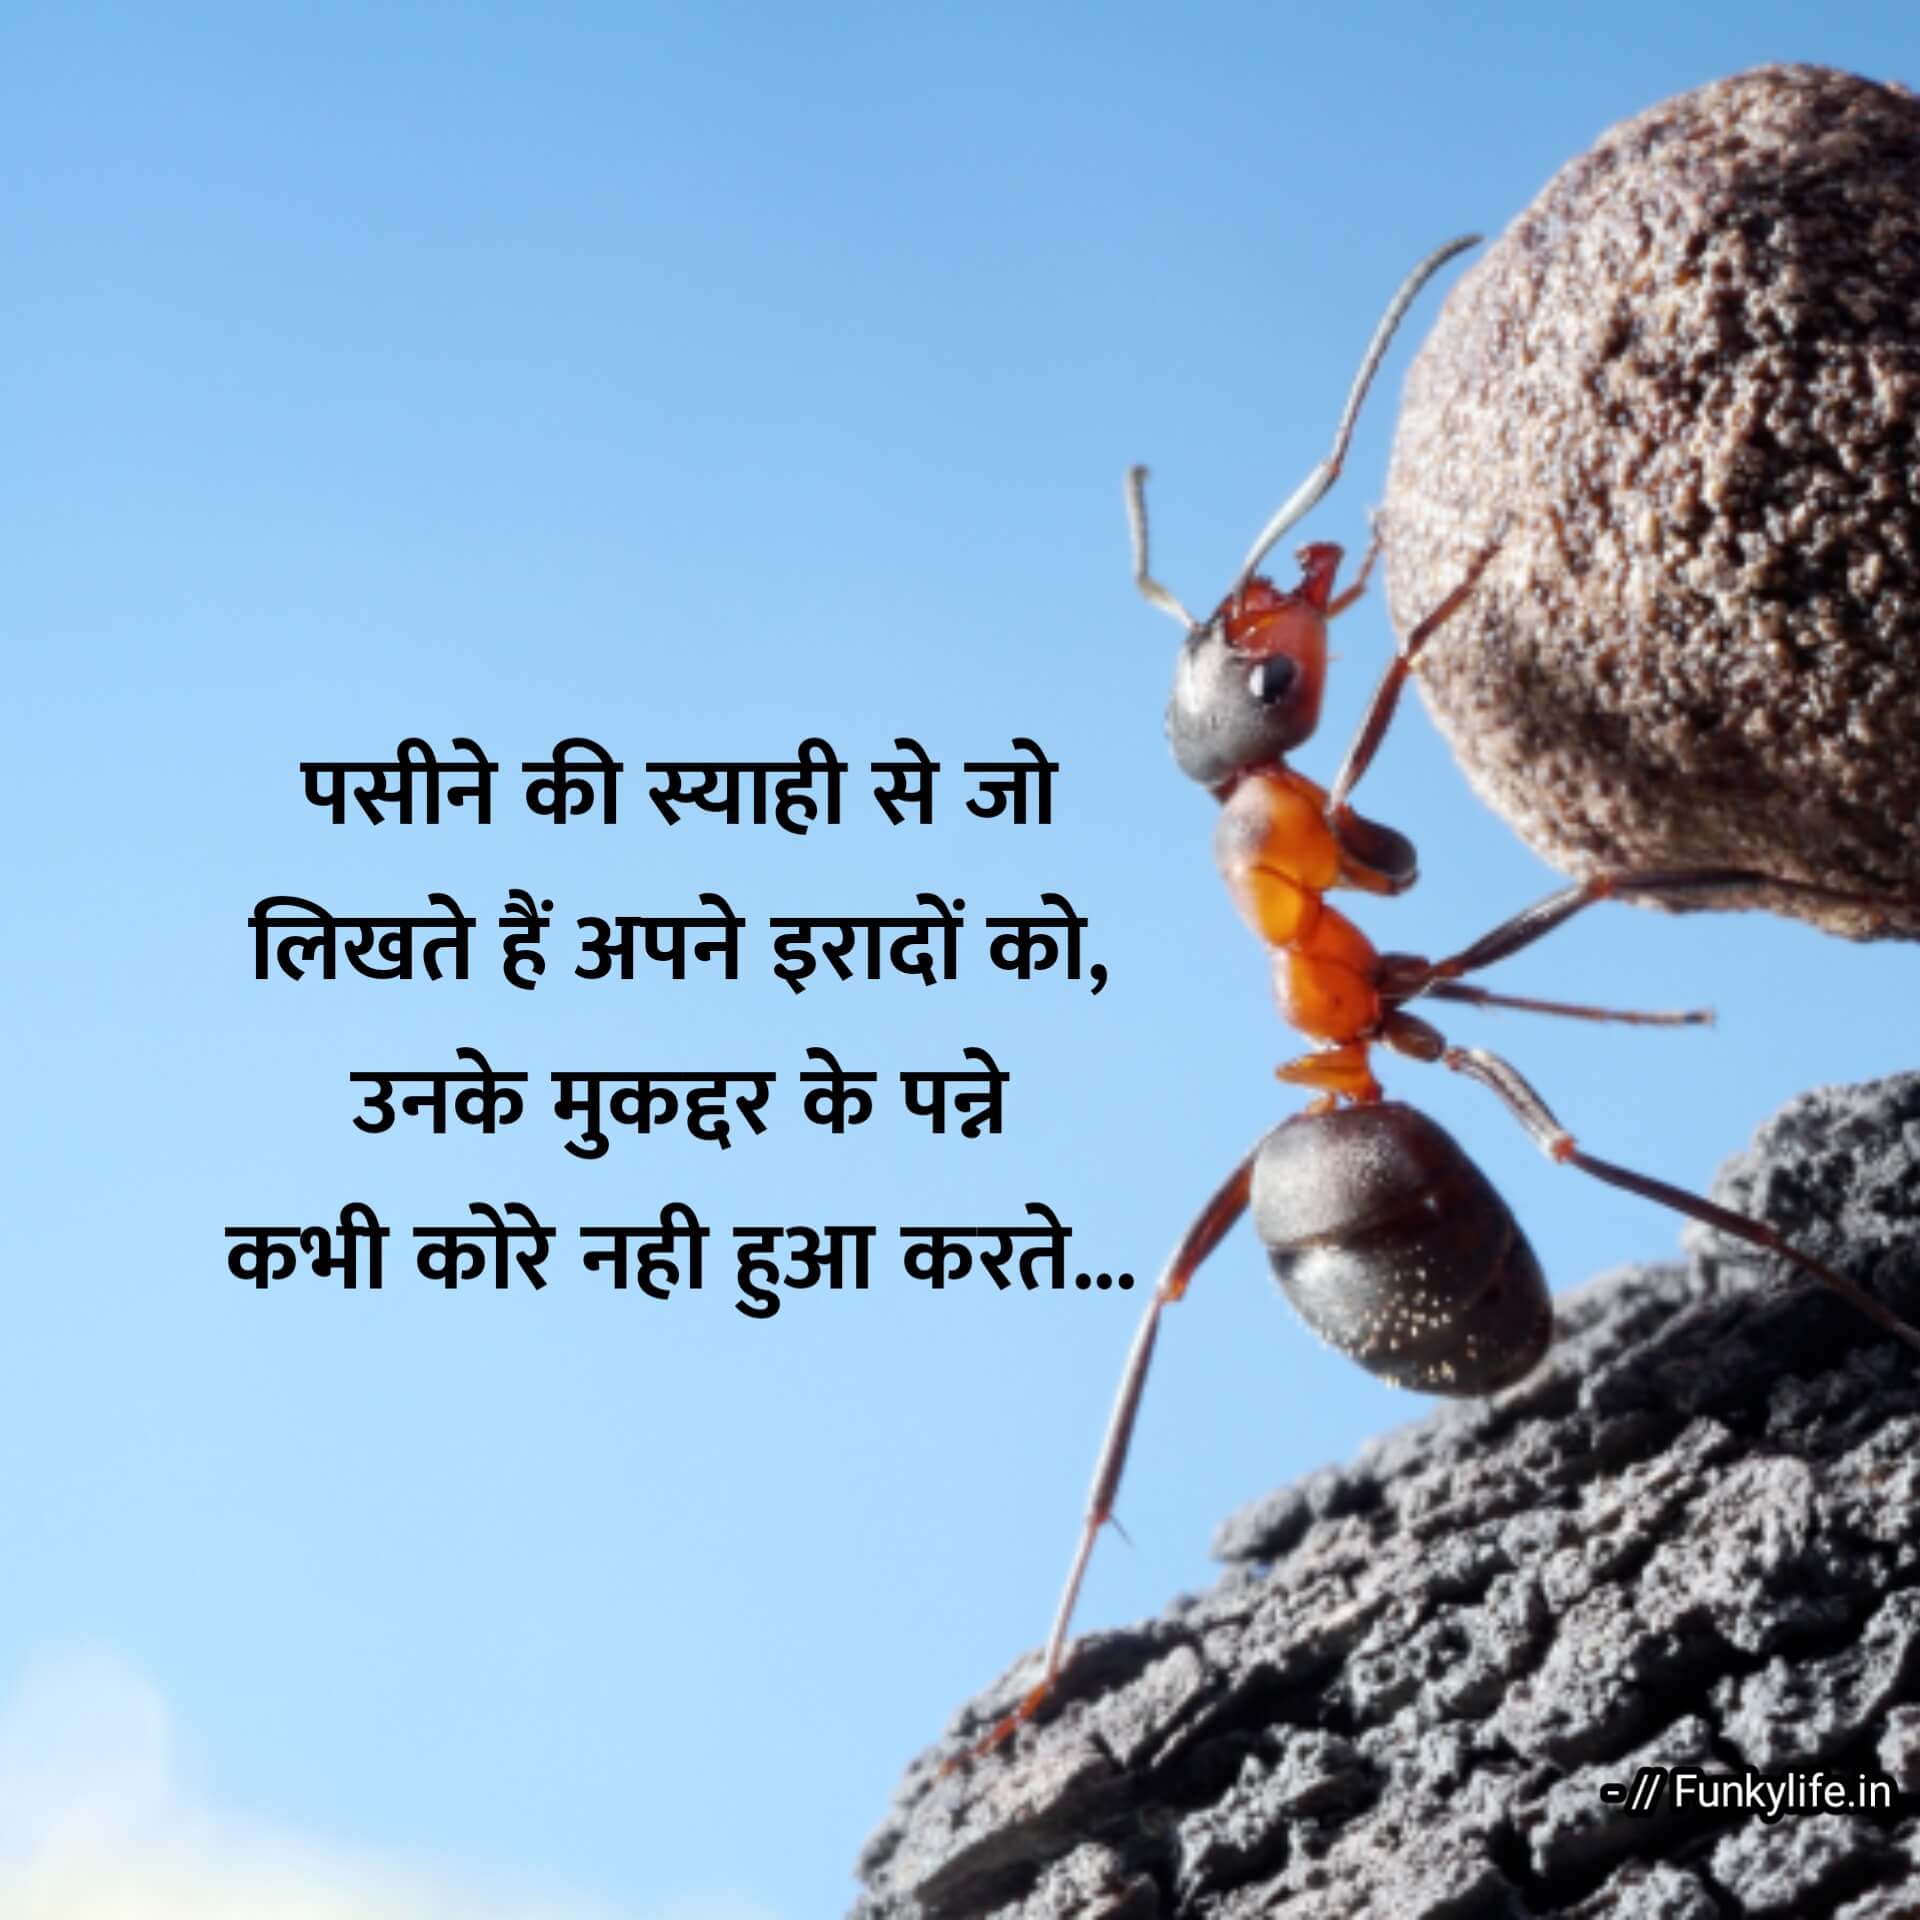 Inspirational Suvichar in Hindi Thoughts